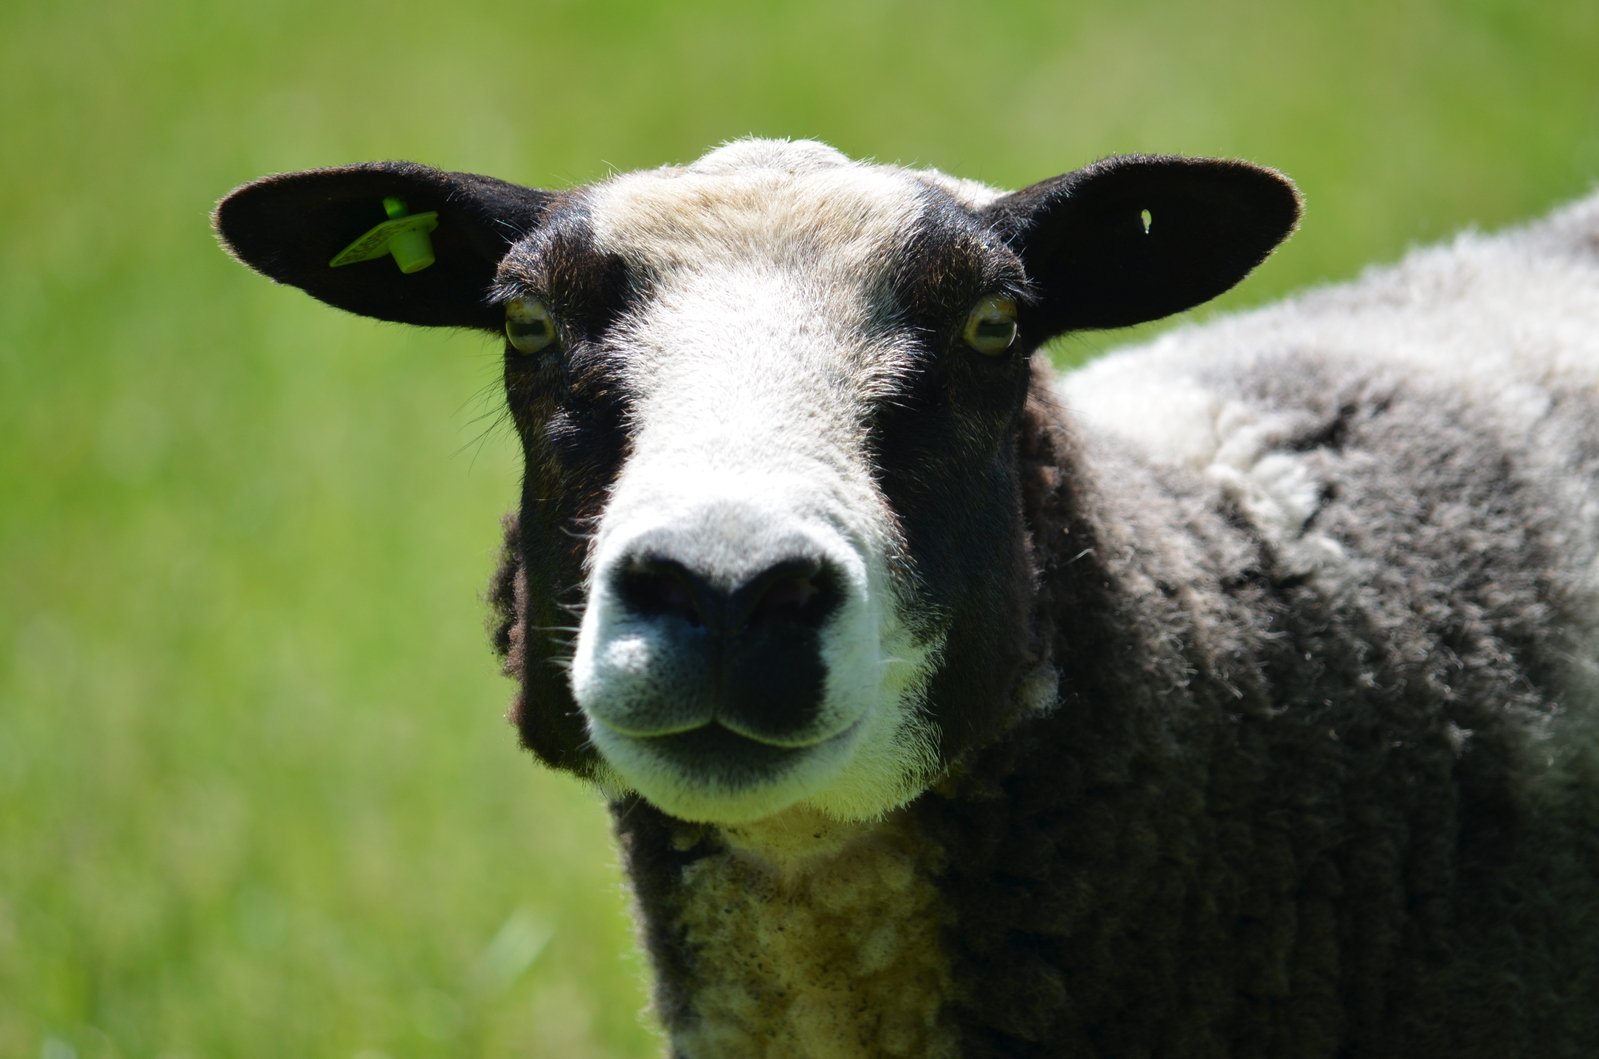 the head of a sheep is looking directly into the camera